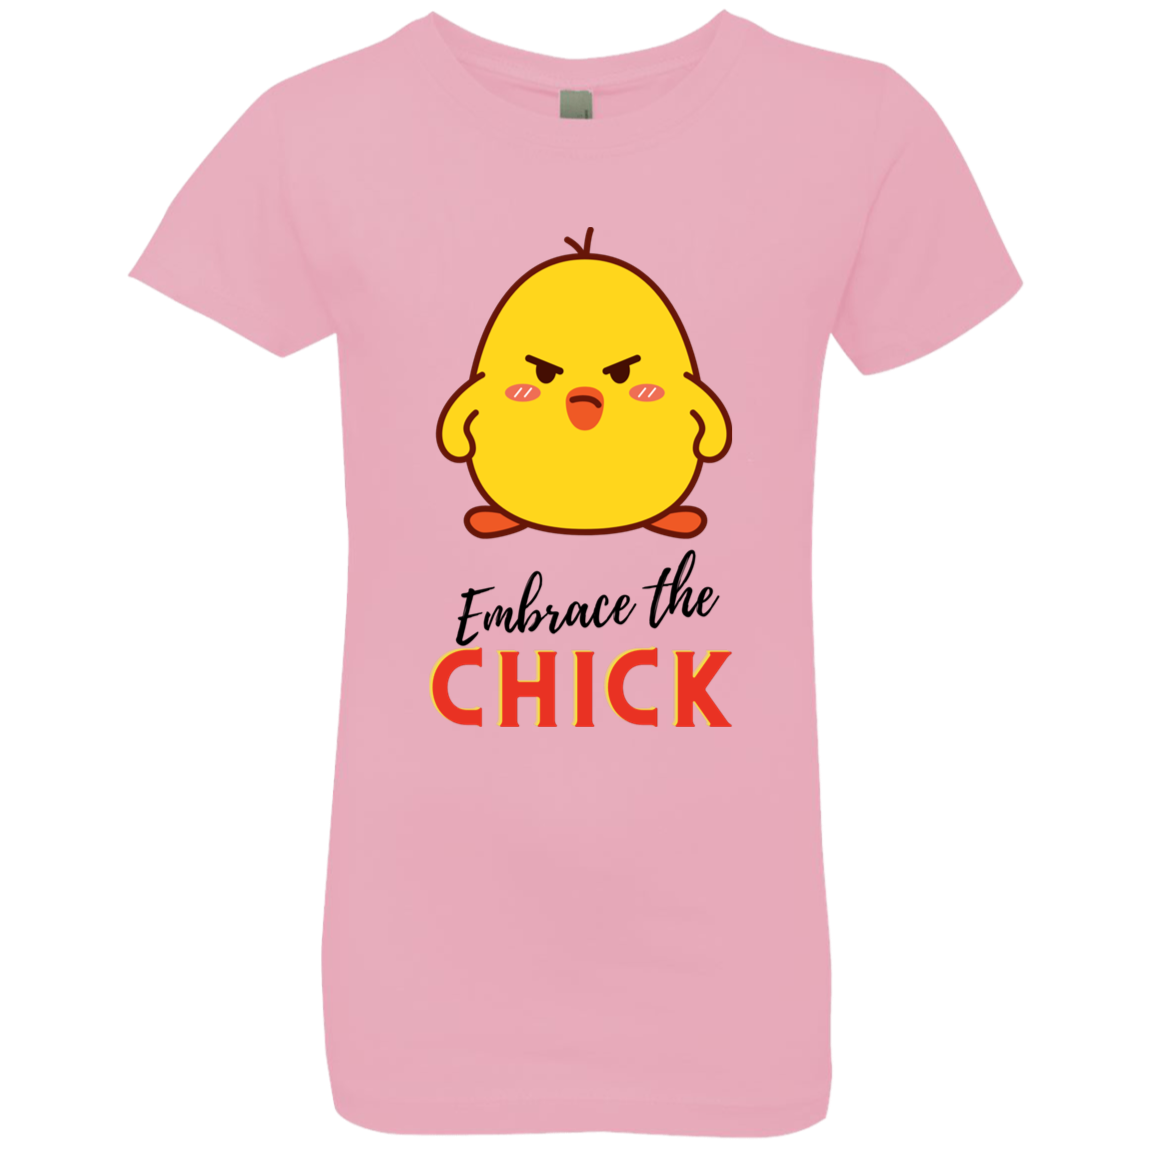 Embrace The Chick - Girls', Teen, Youth T-Shirt